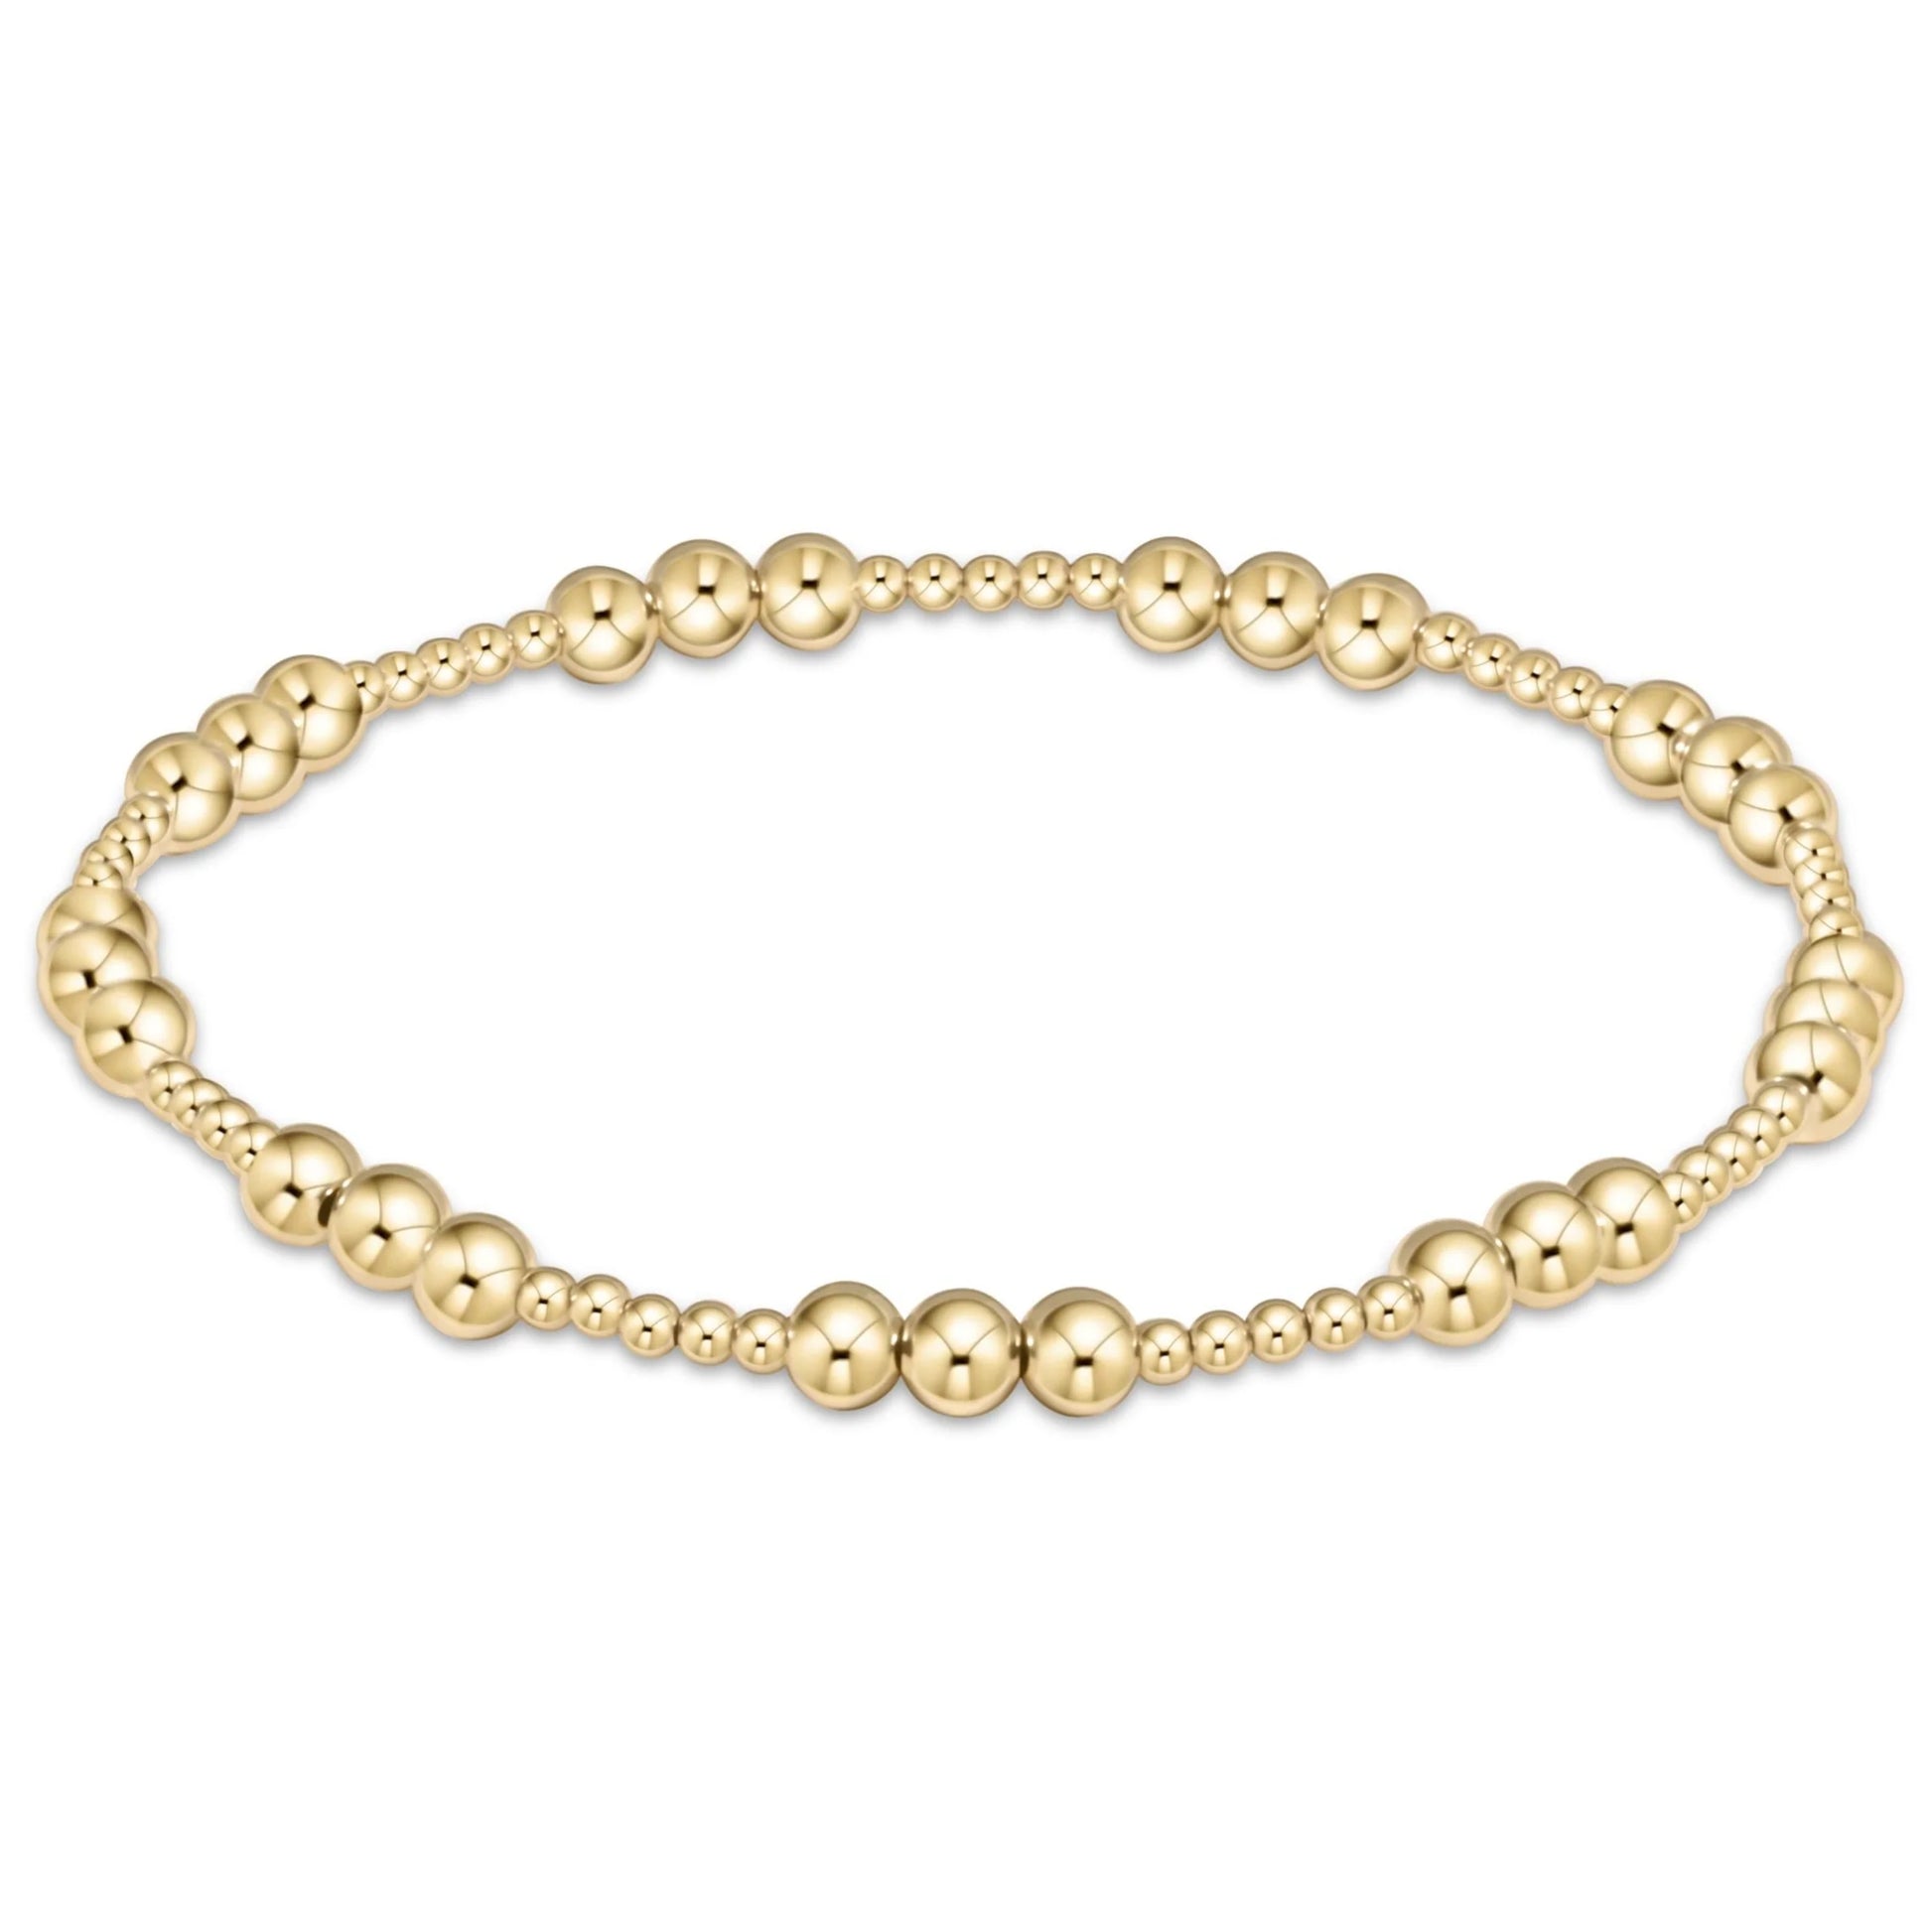 Class Joy 6mm bracelet by eNewton. Made with 6mm and 3mm, 14kt gold-filled beads. Shop at The Painted Cottage in Edgewater, MD.